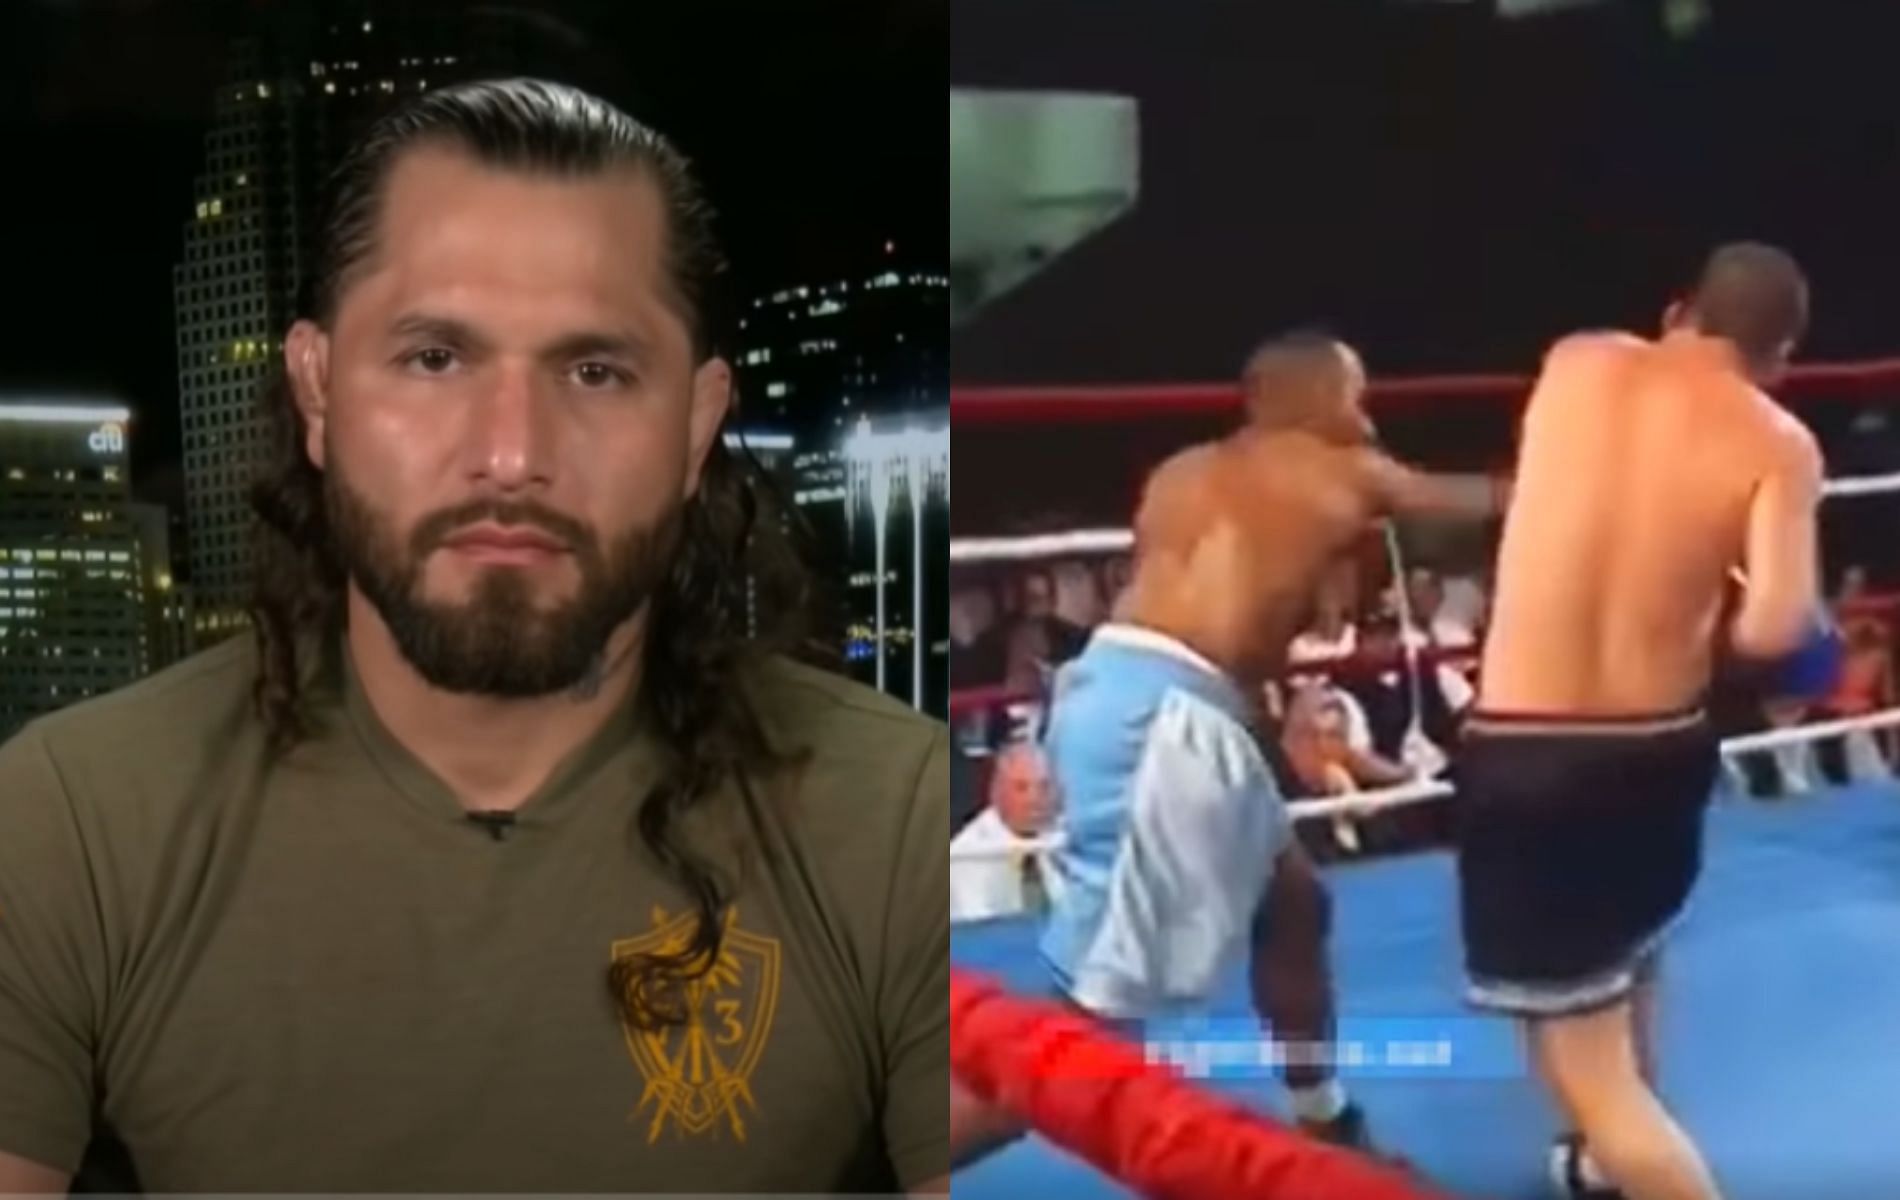 Fans react to UFC star Jorge Masvidal pointing at the 